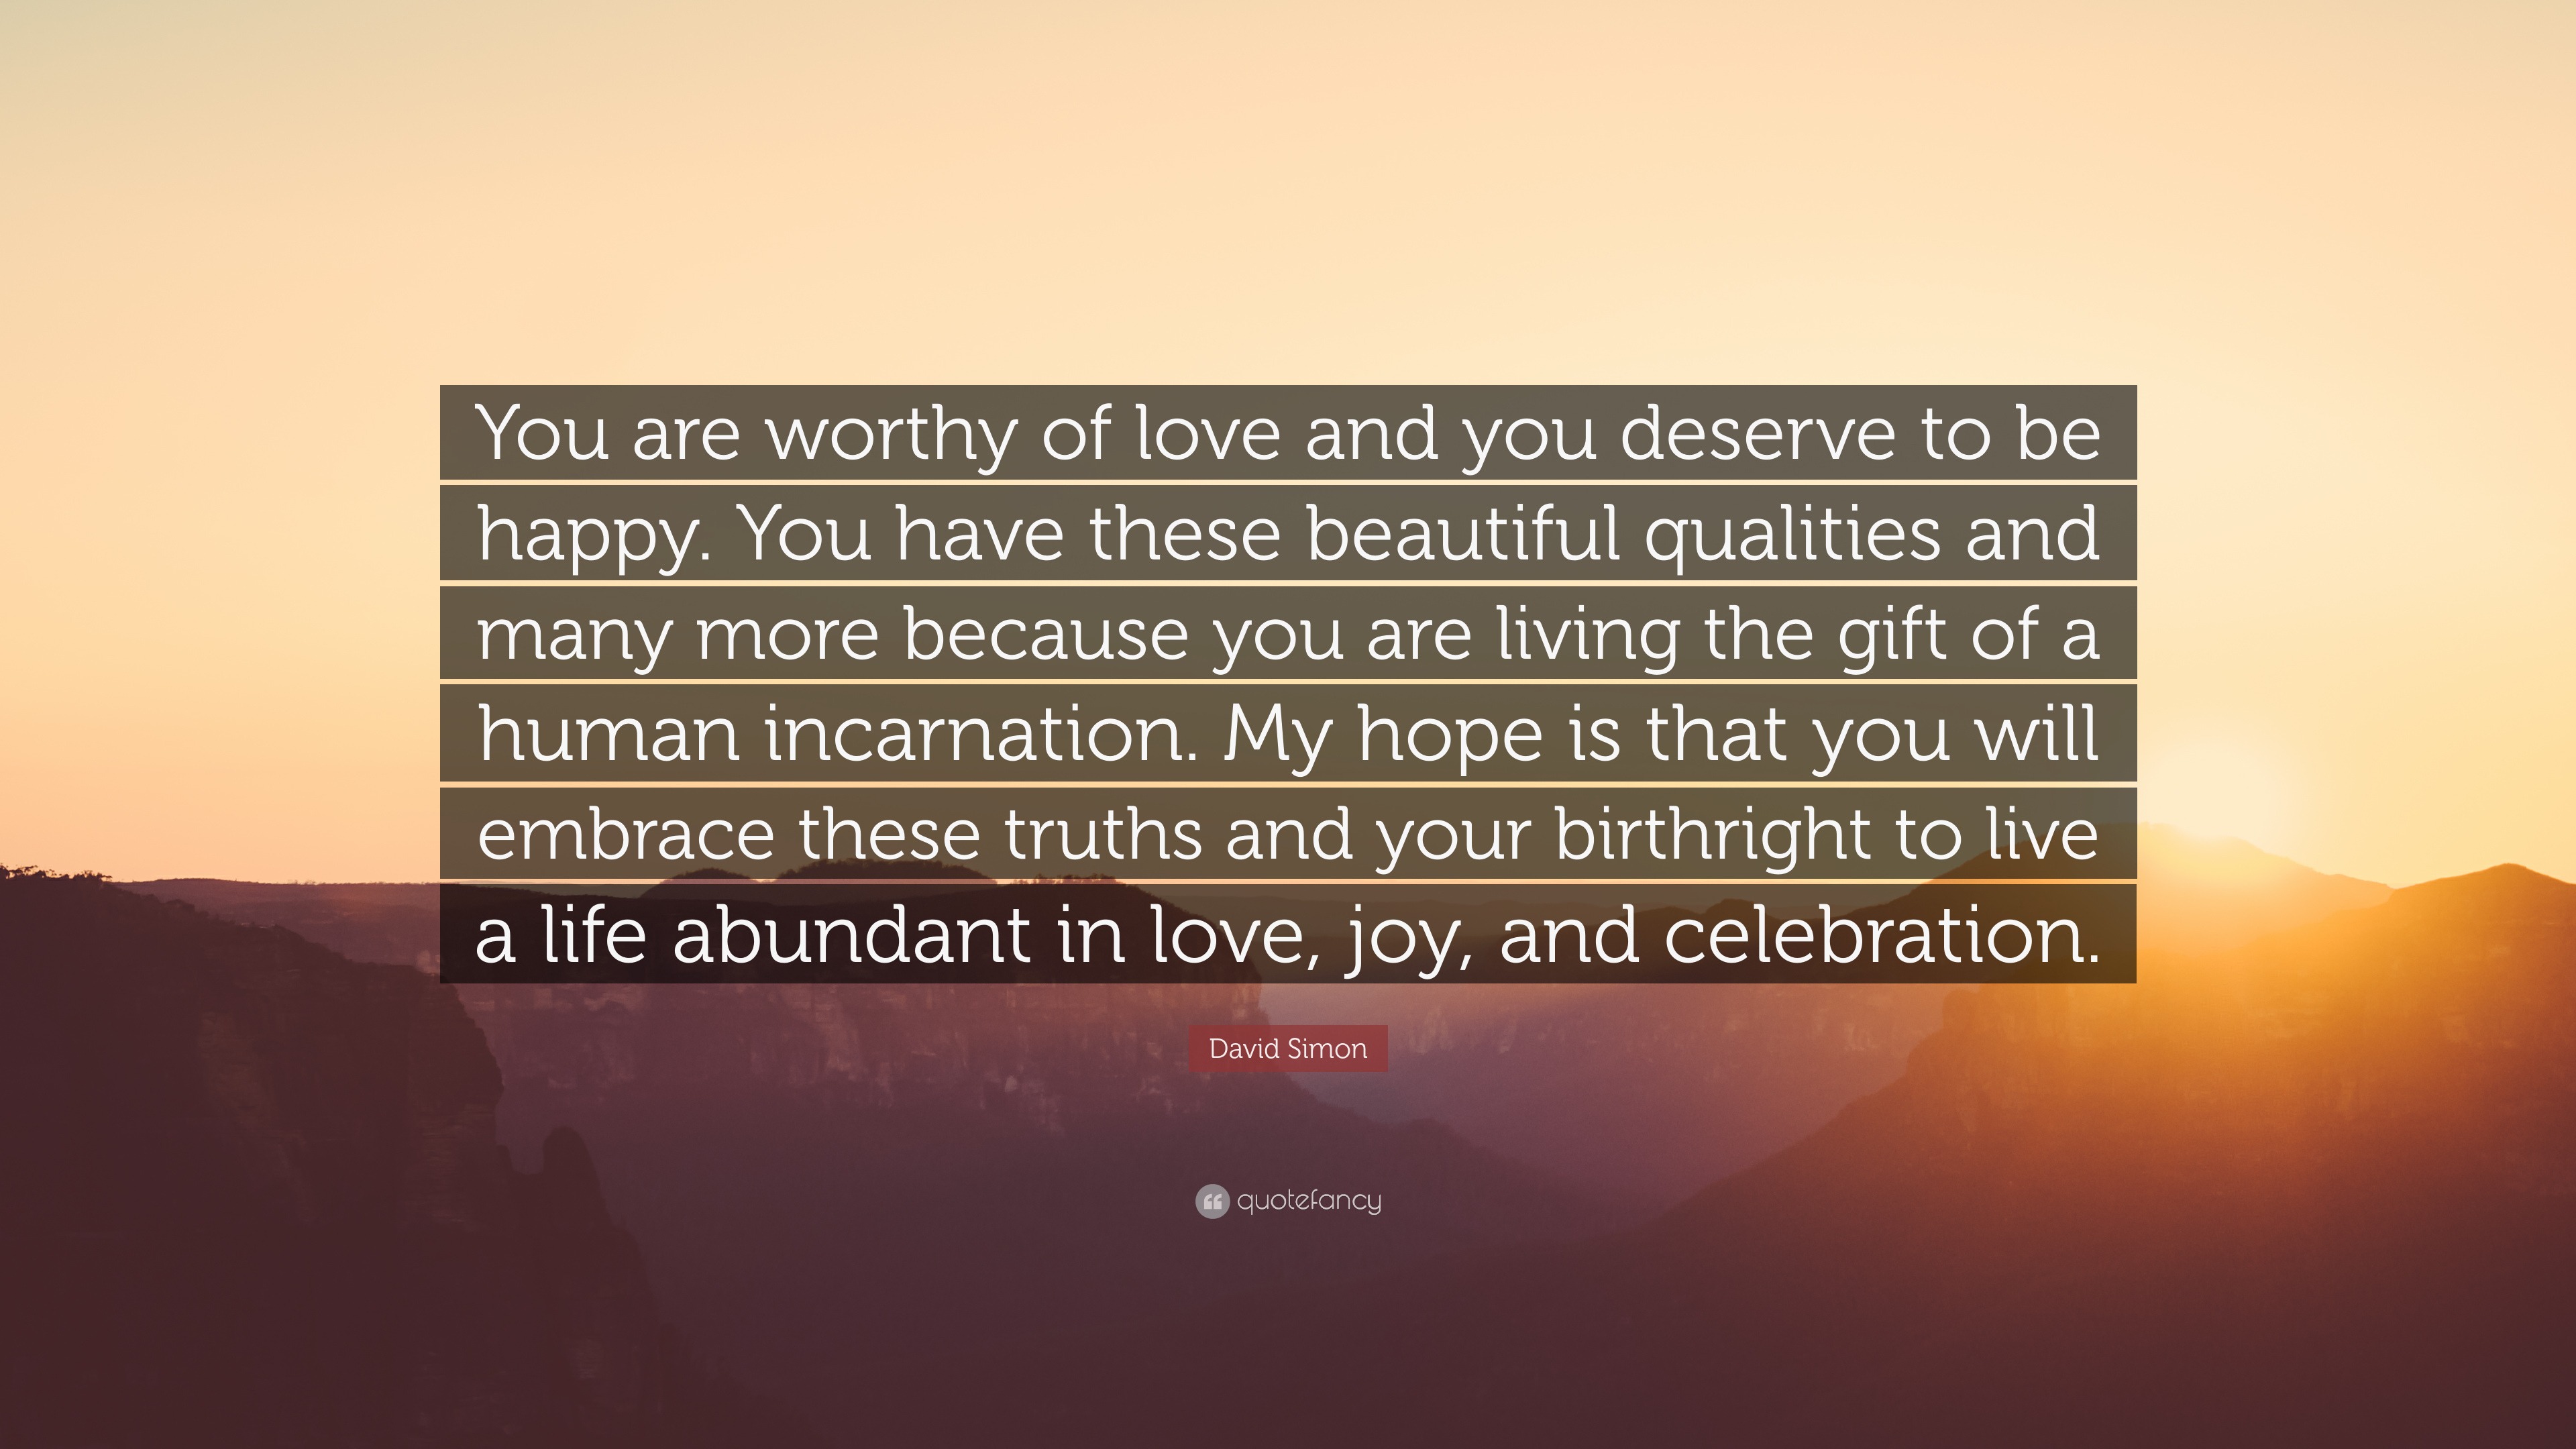 David Simon Quote You Are Worthy Of Love And You Deserve To Be Happy You Have These Beautiful Qualities And Many More Because You Are Liv